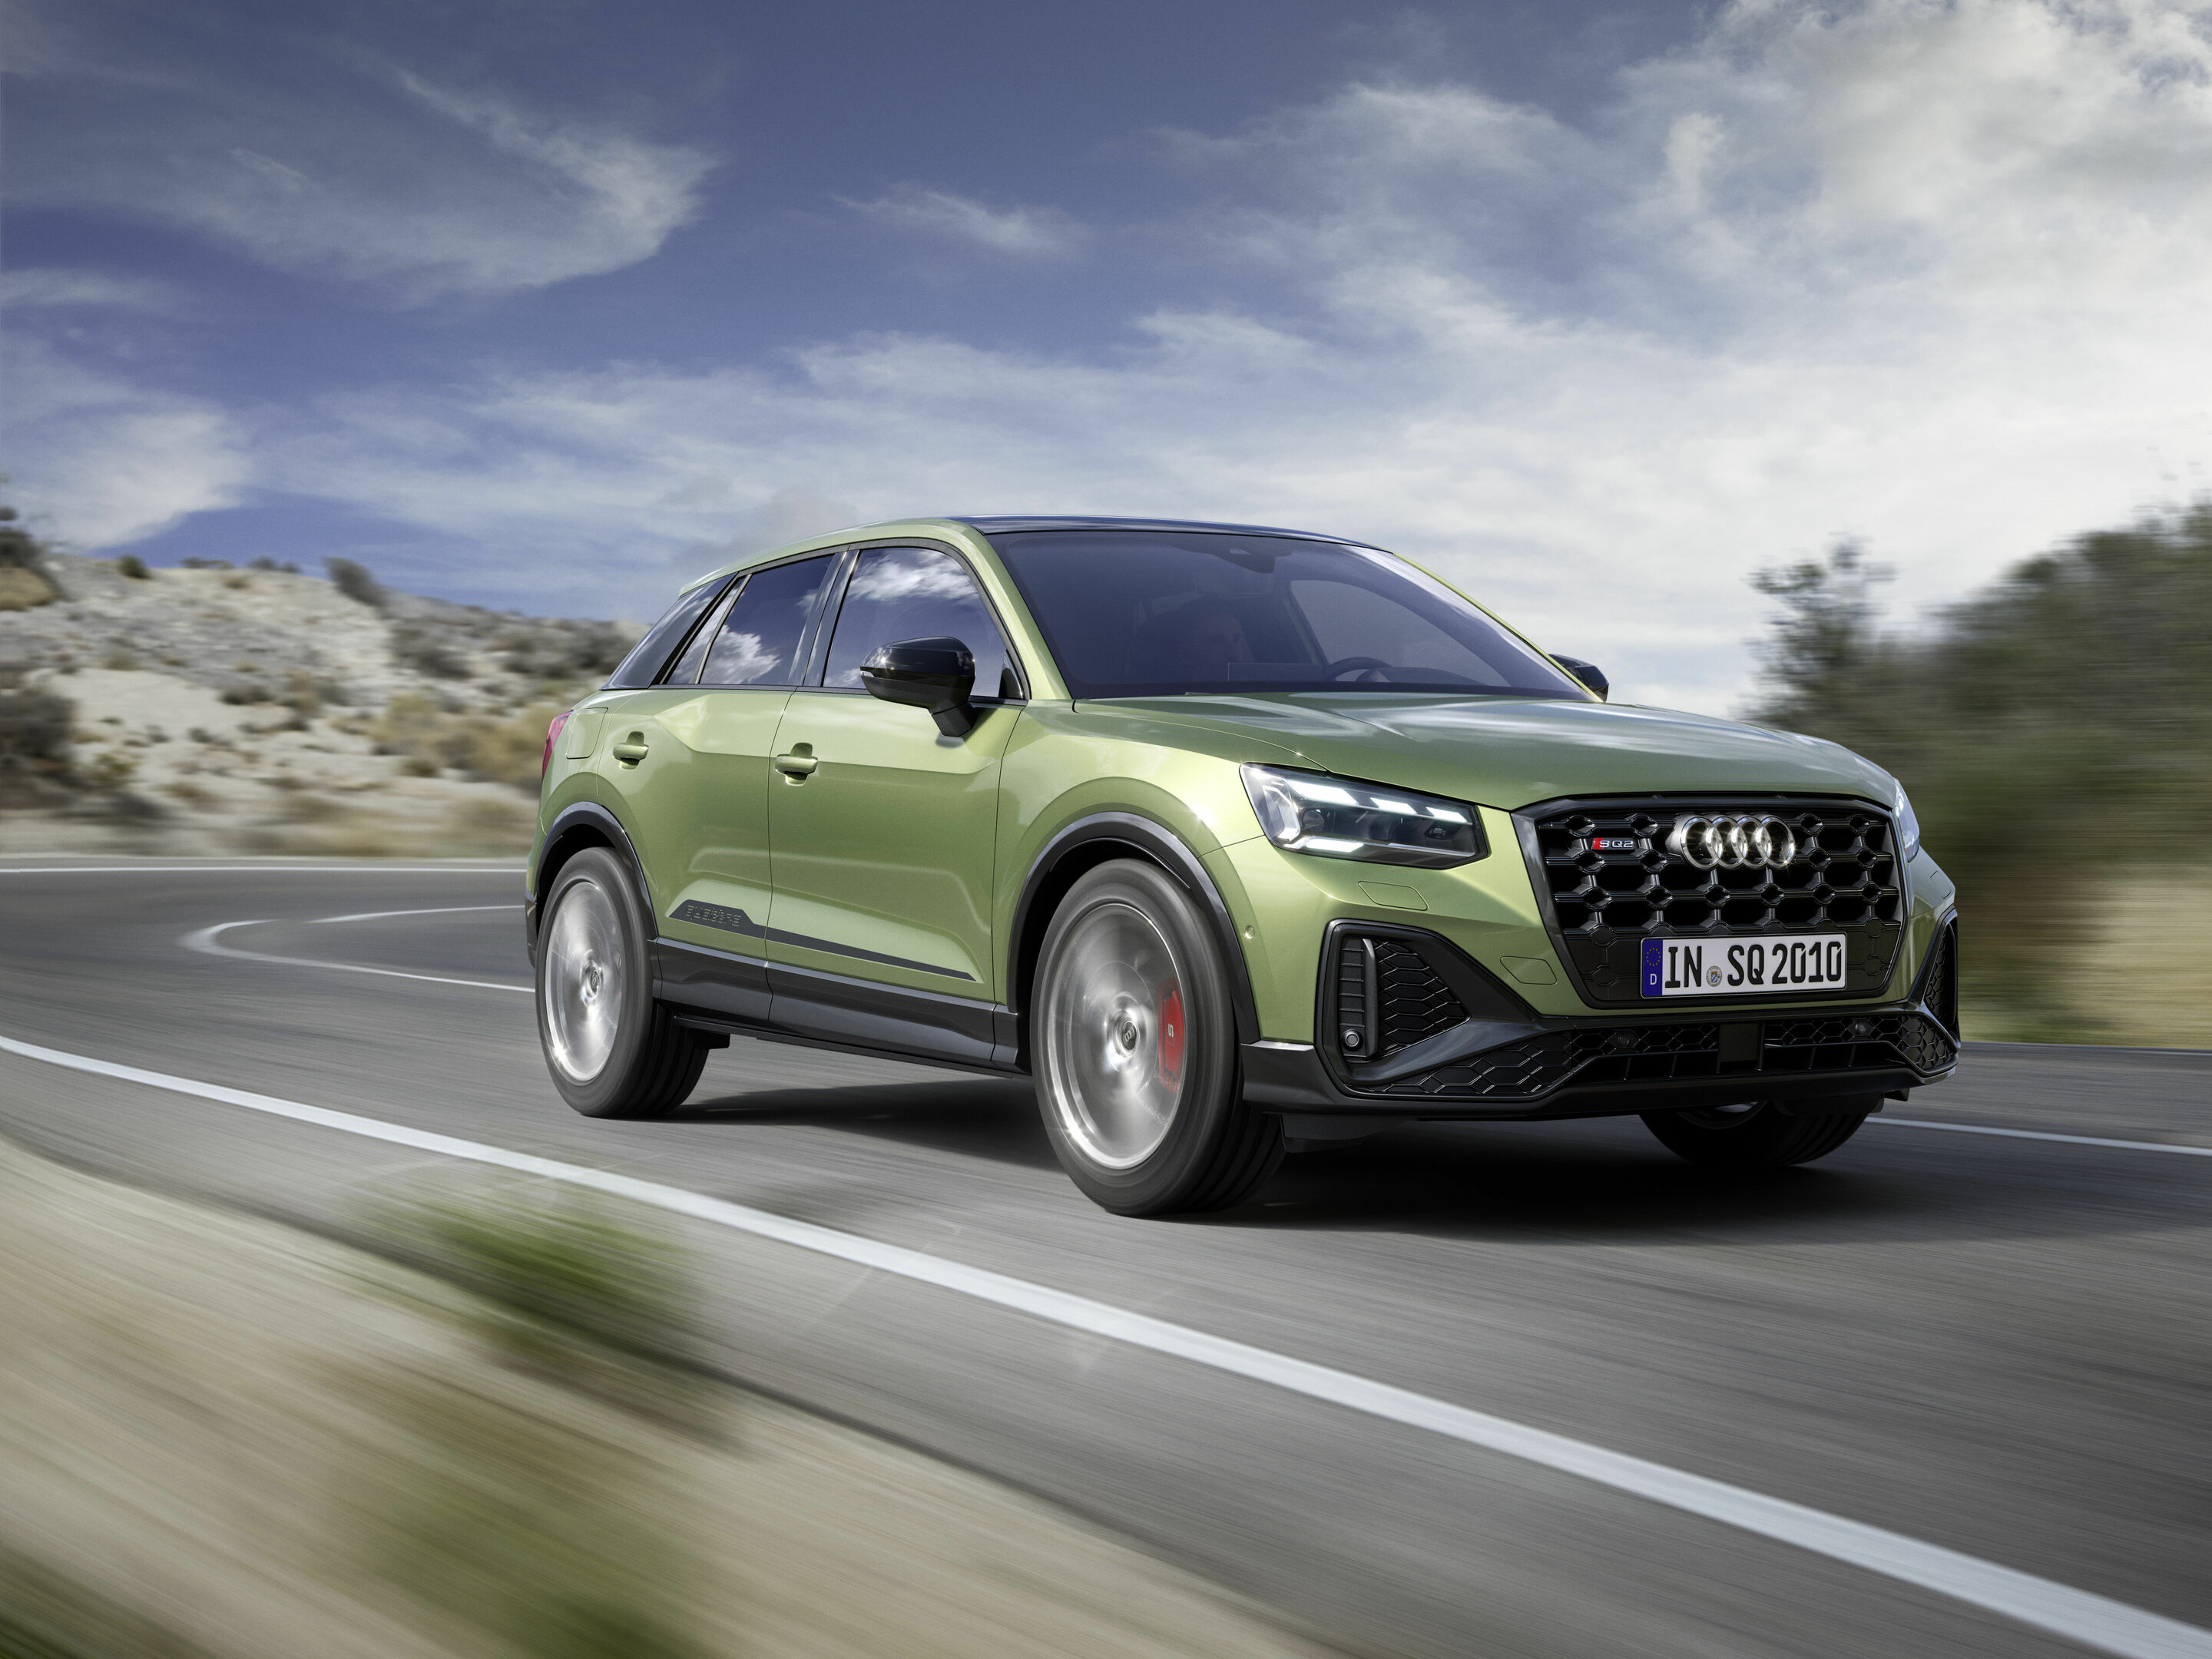 Exceptional compact sports car for individualists: Audi gives the